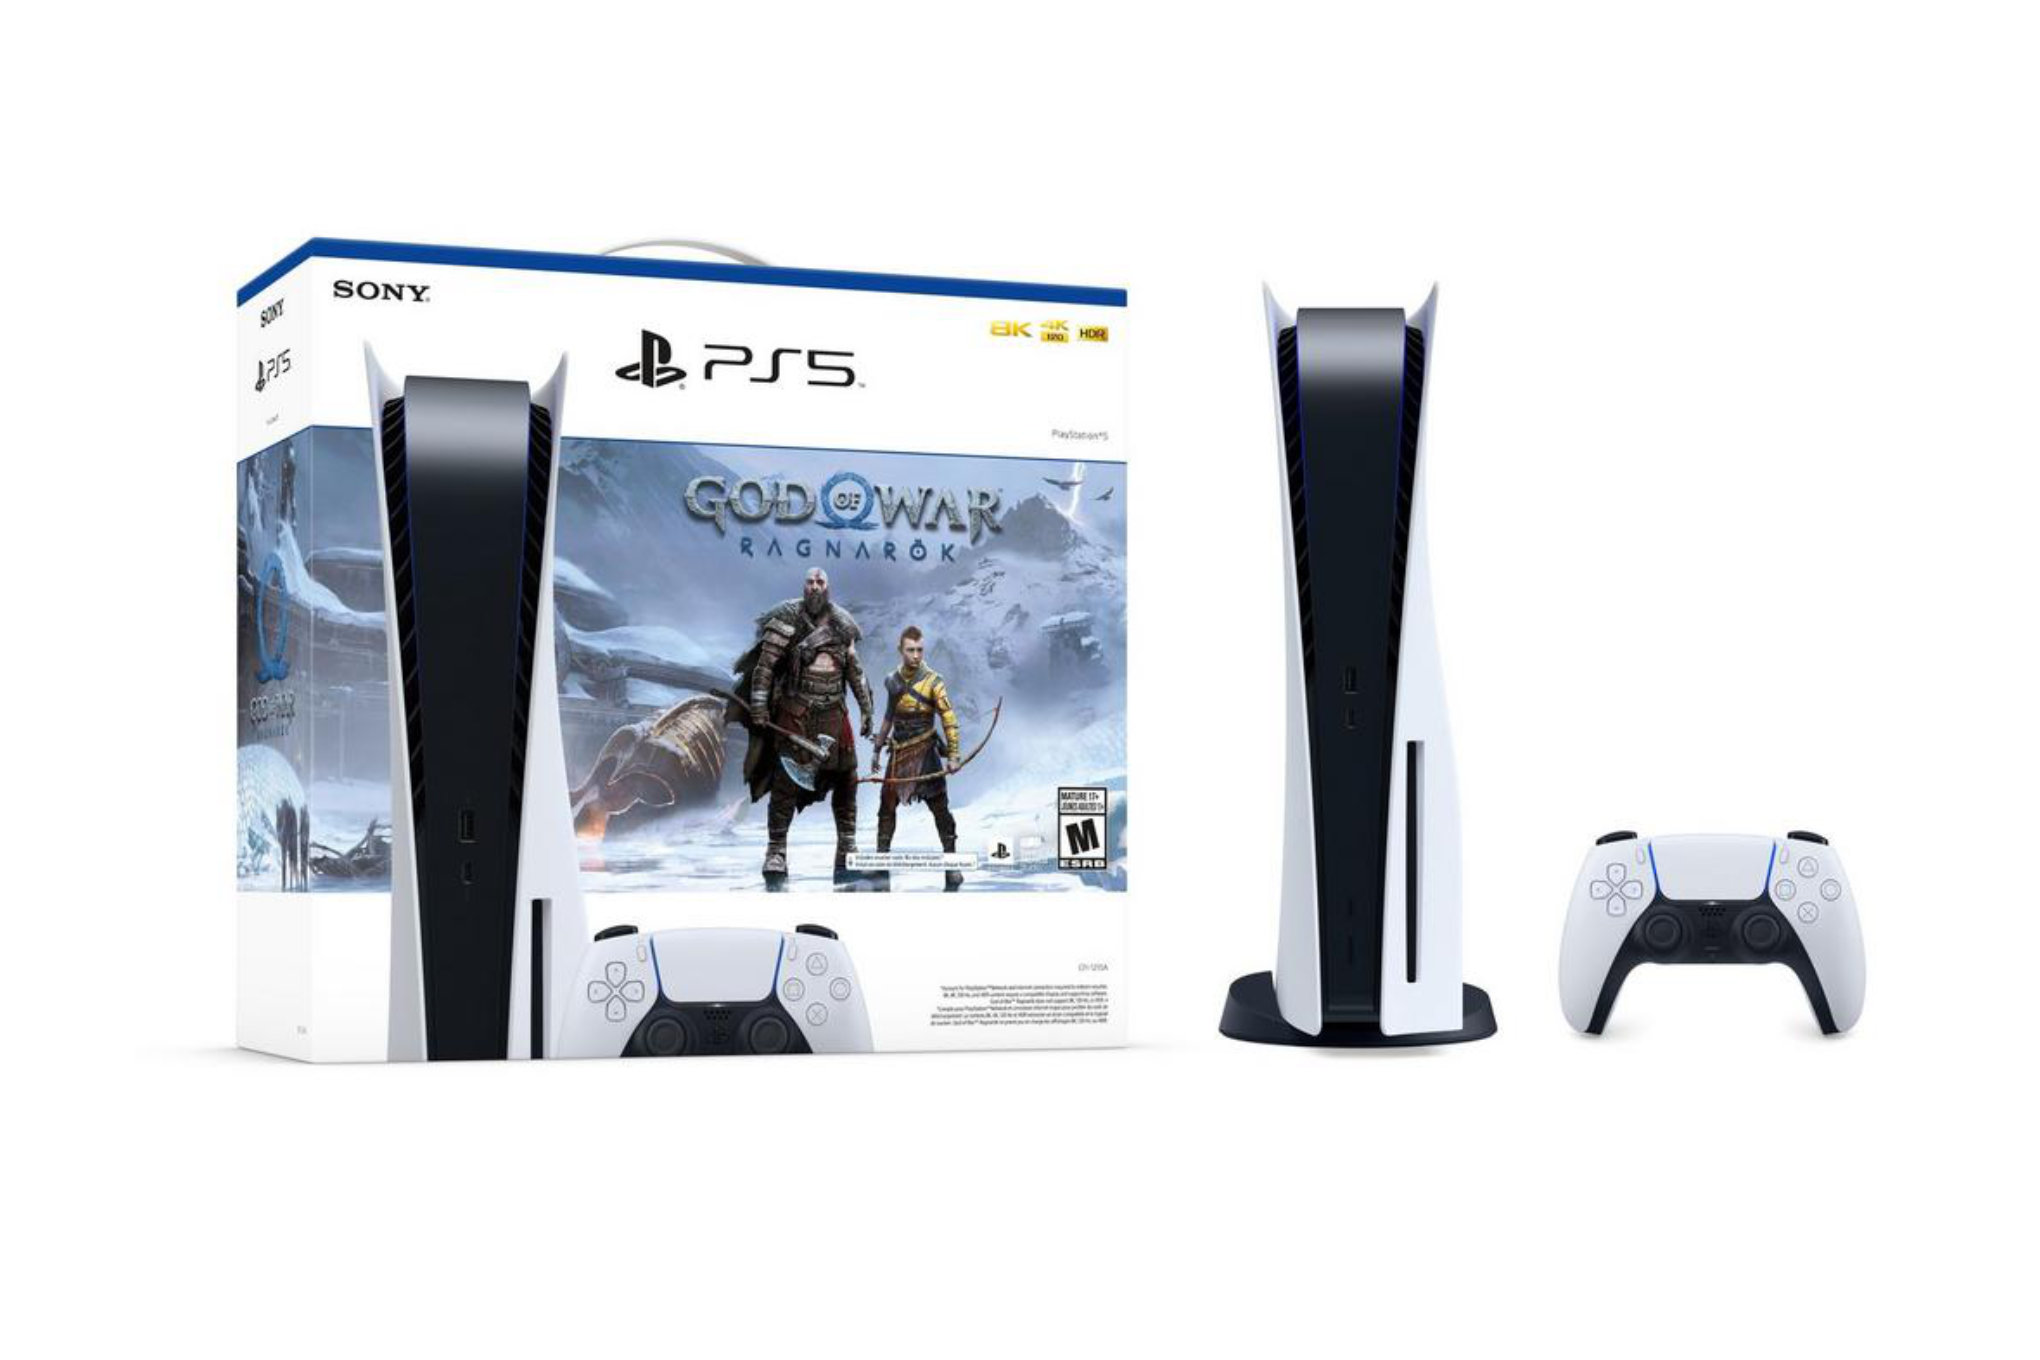 Sony’s God of War: Ragnarök PS5 bundle is shown. It contains the PlayStation 5 console, a DualSense controller, cables, plus a digital code for the God of War game.